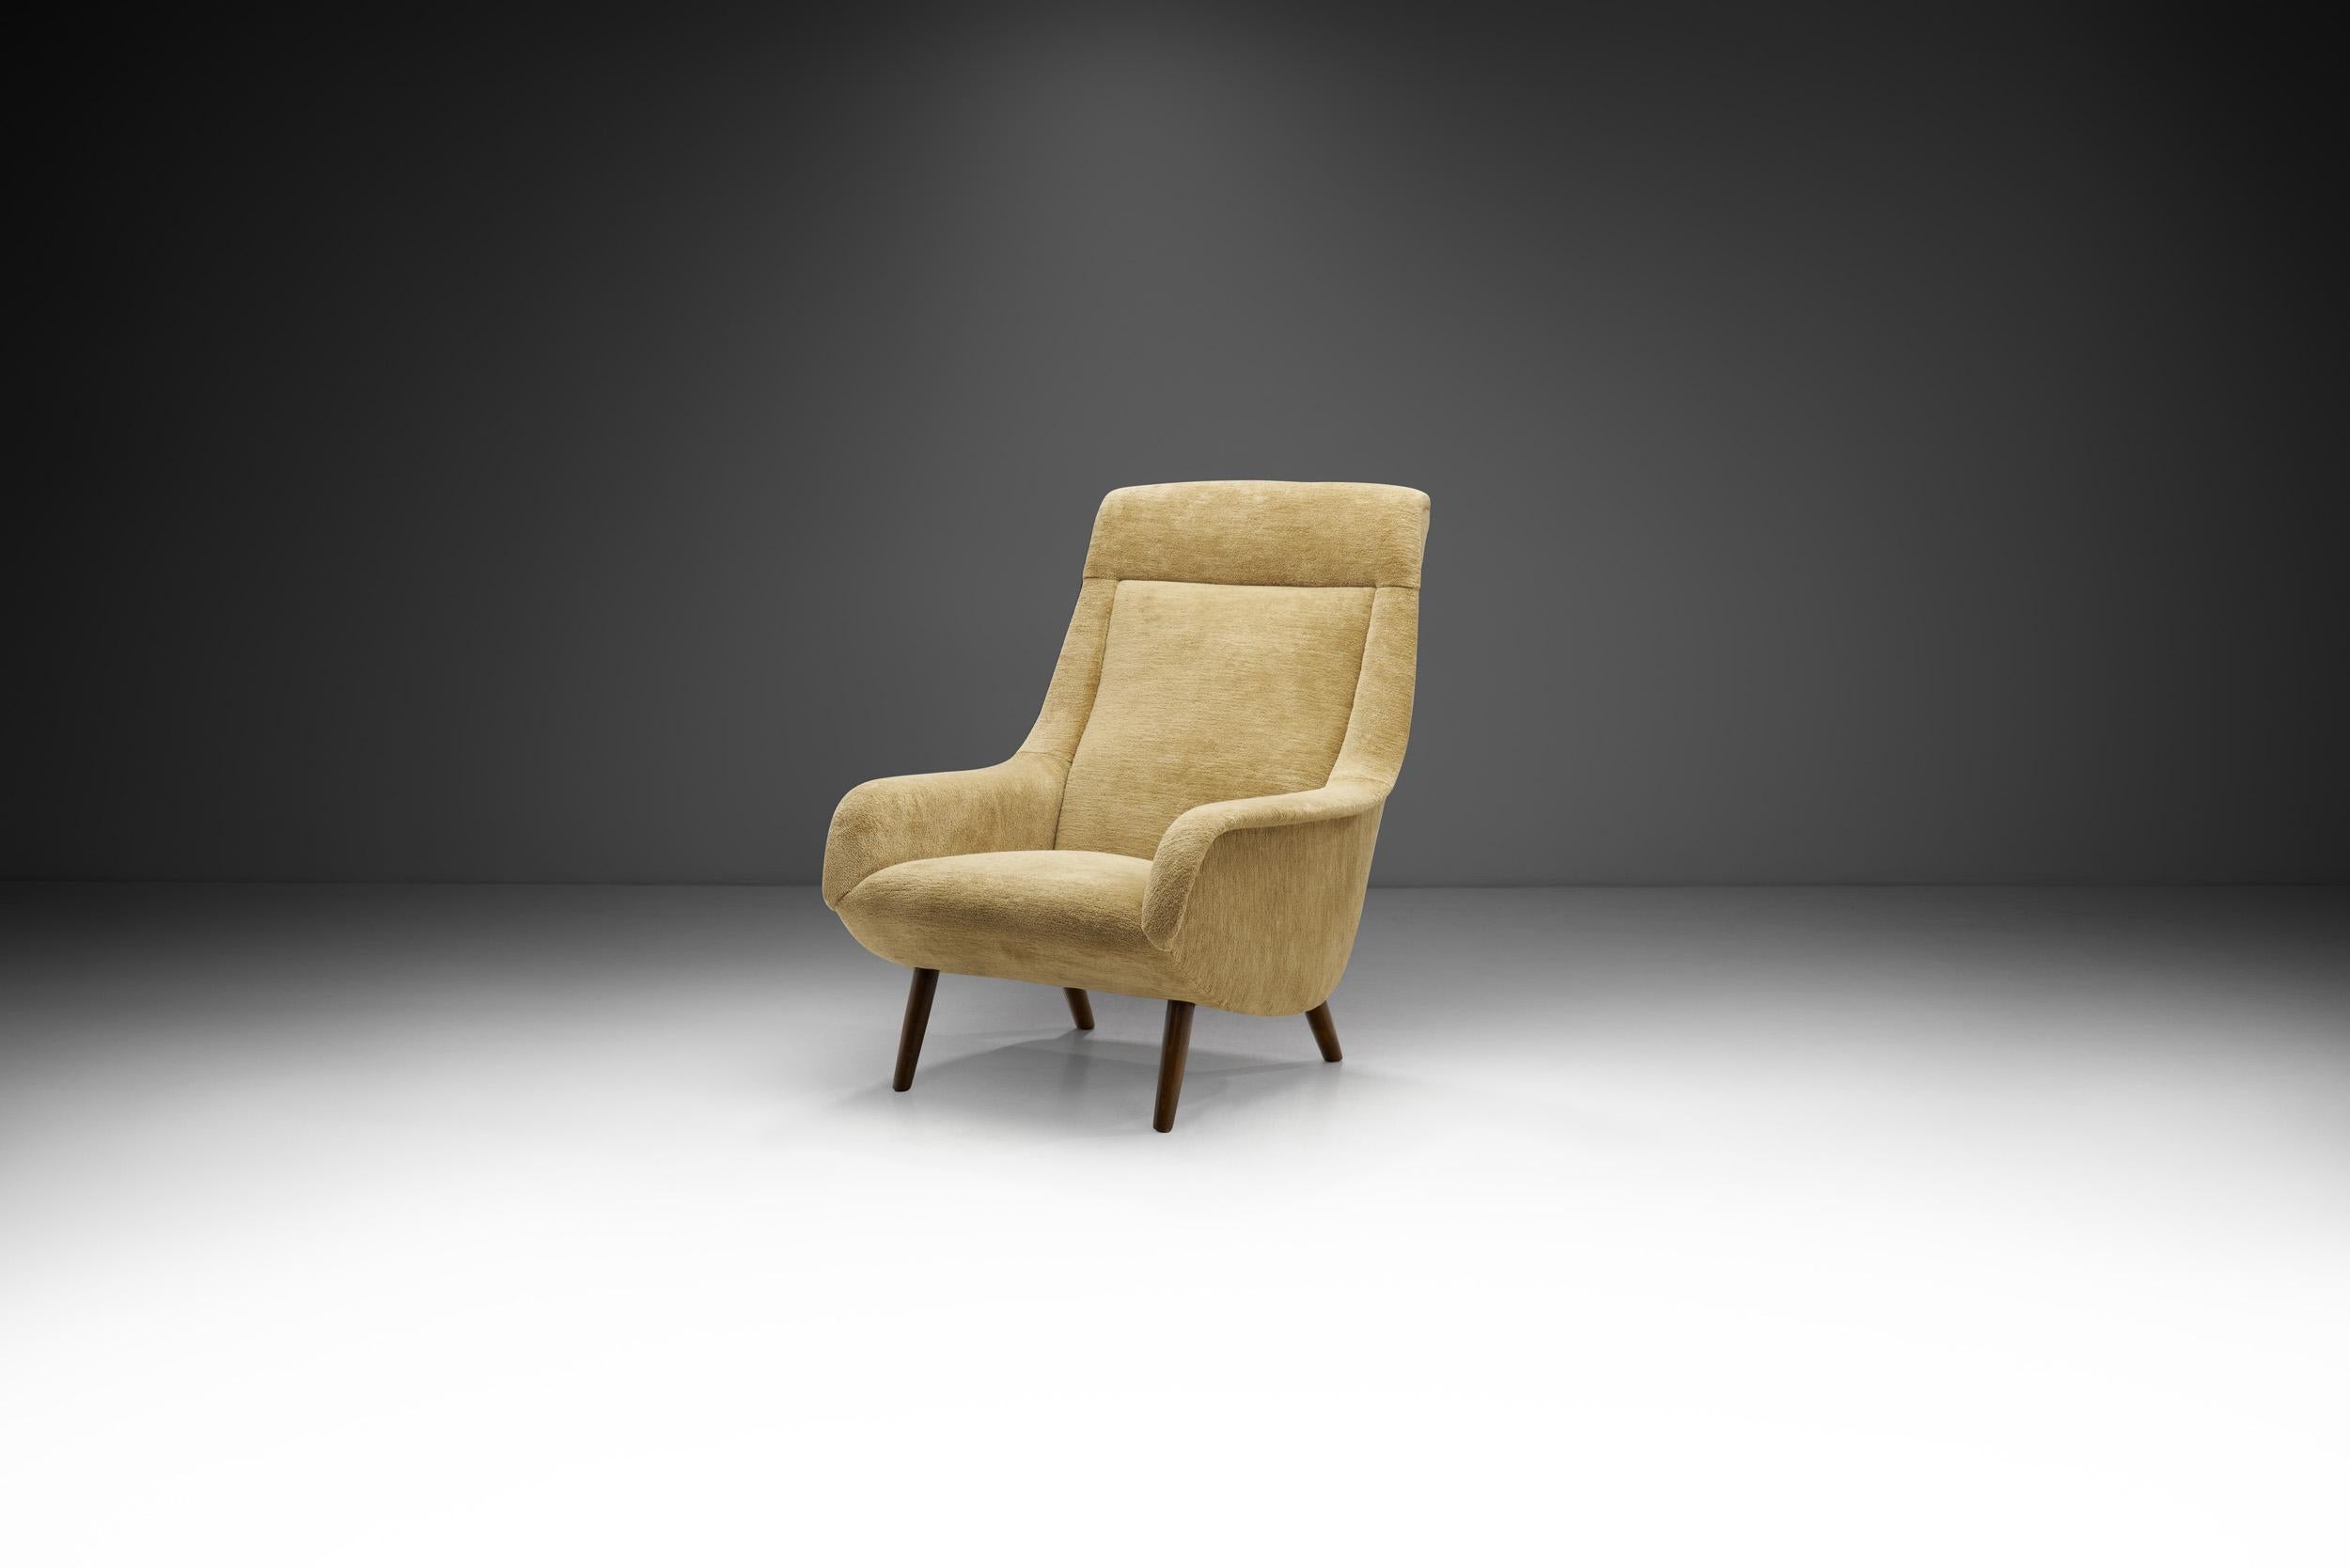 Like Marco Zanuso’s similar “Lady” armchair or Alf Svensson’s “Capri”, and Bengt Ruda’s “Ombord”, this gentle and stylish silhouette hasn’t seen a decline in popularity since the mid-century era. What unites these European models are the